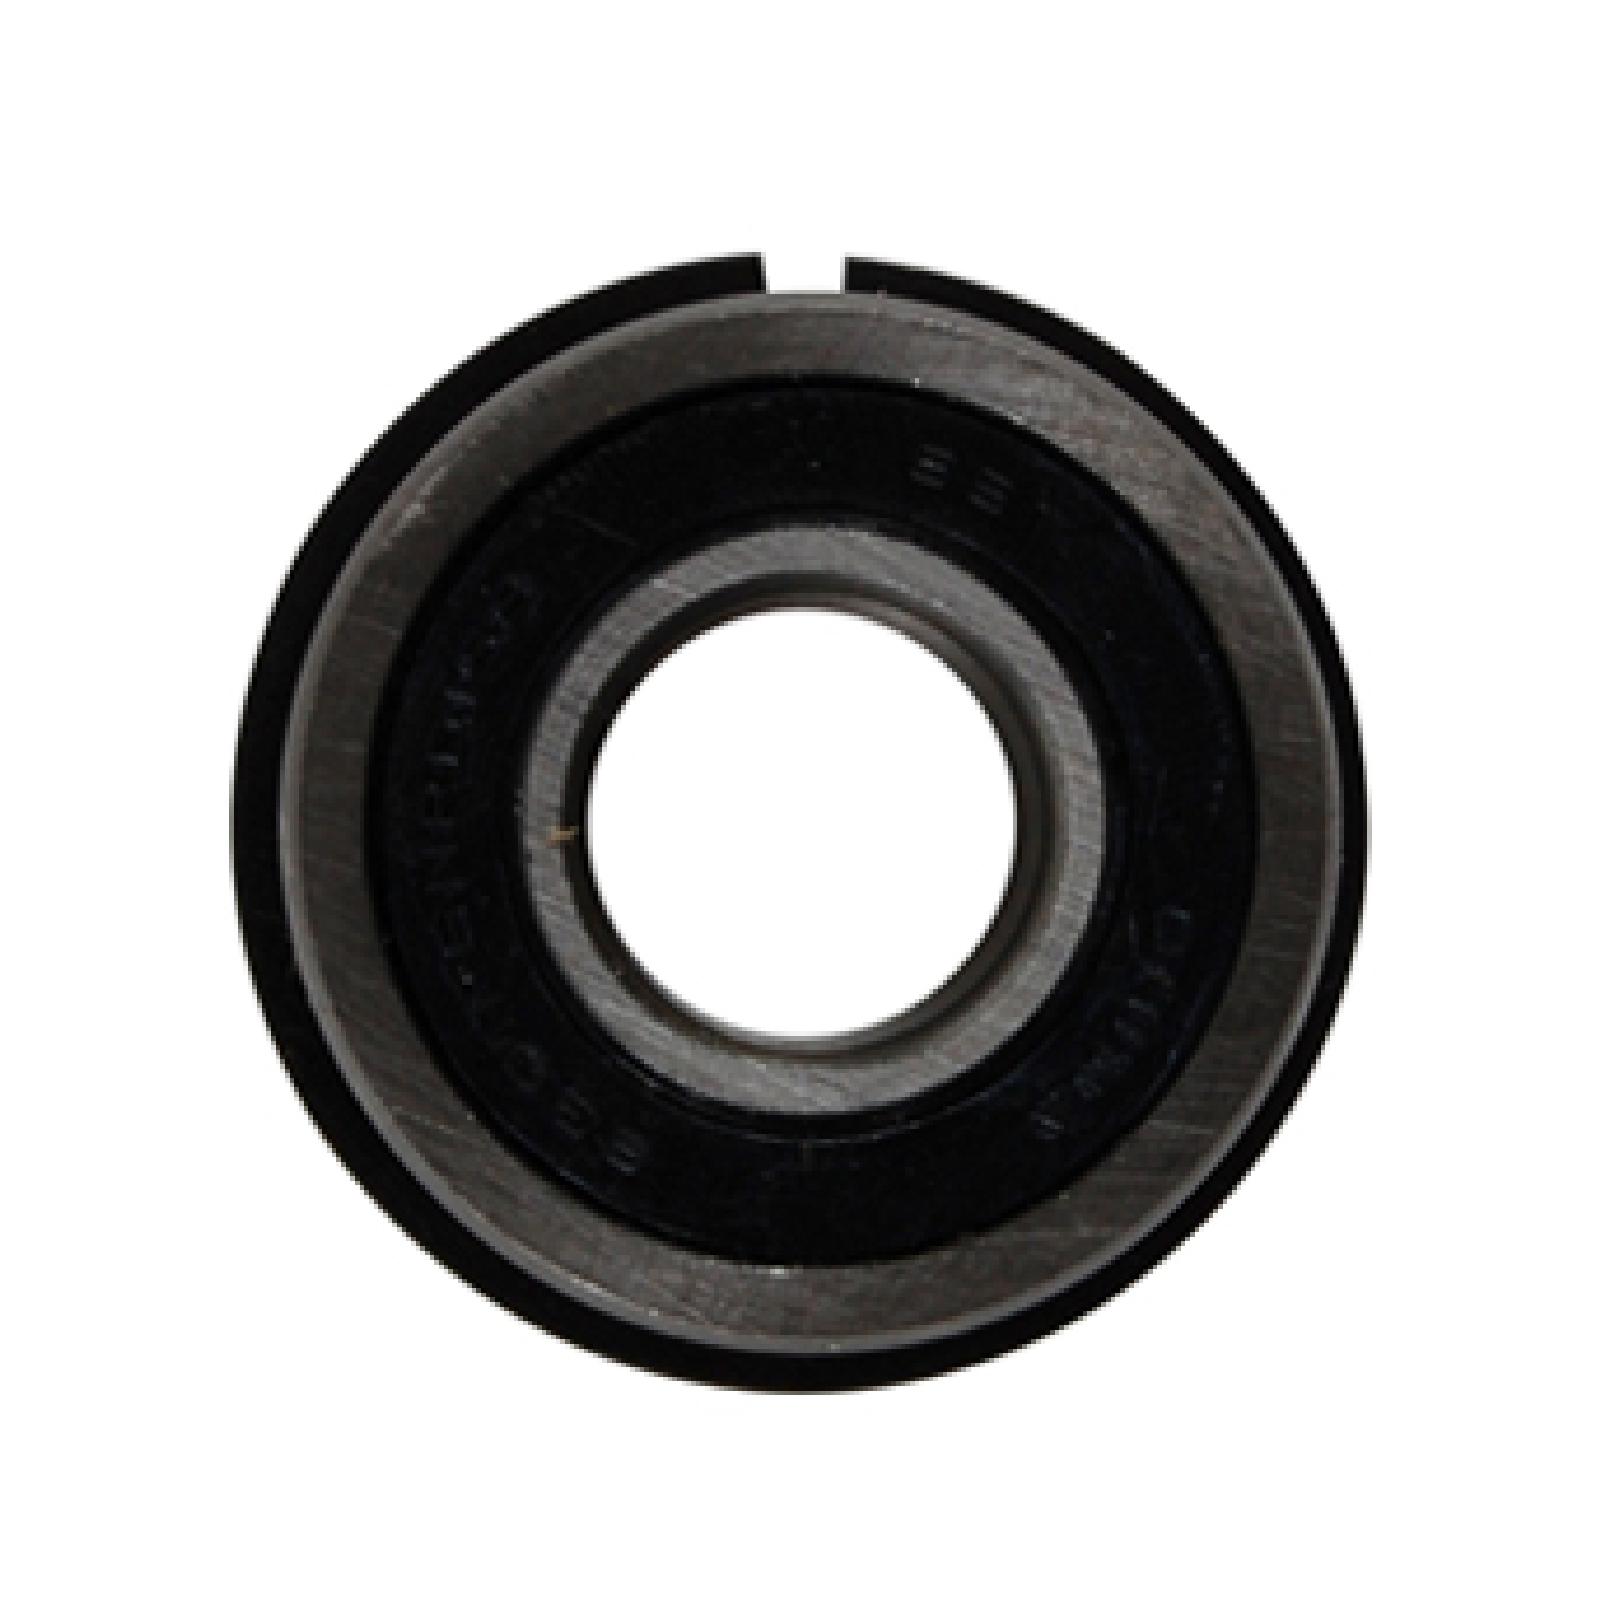 BEARING BALL part# 741-04188A by MTD - Click Image to Close